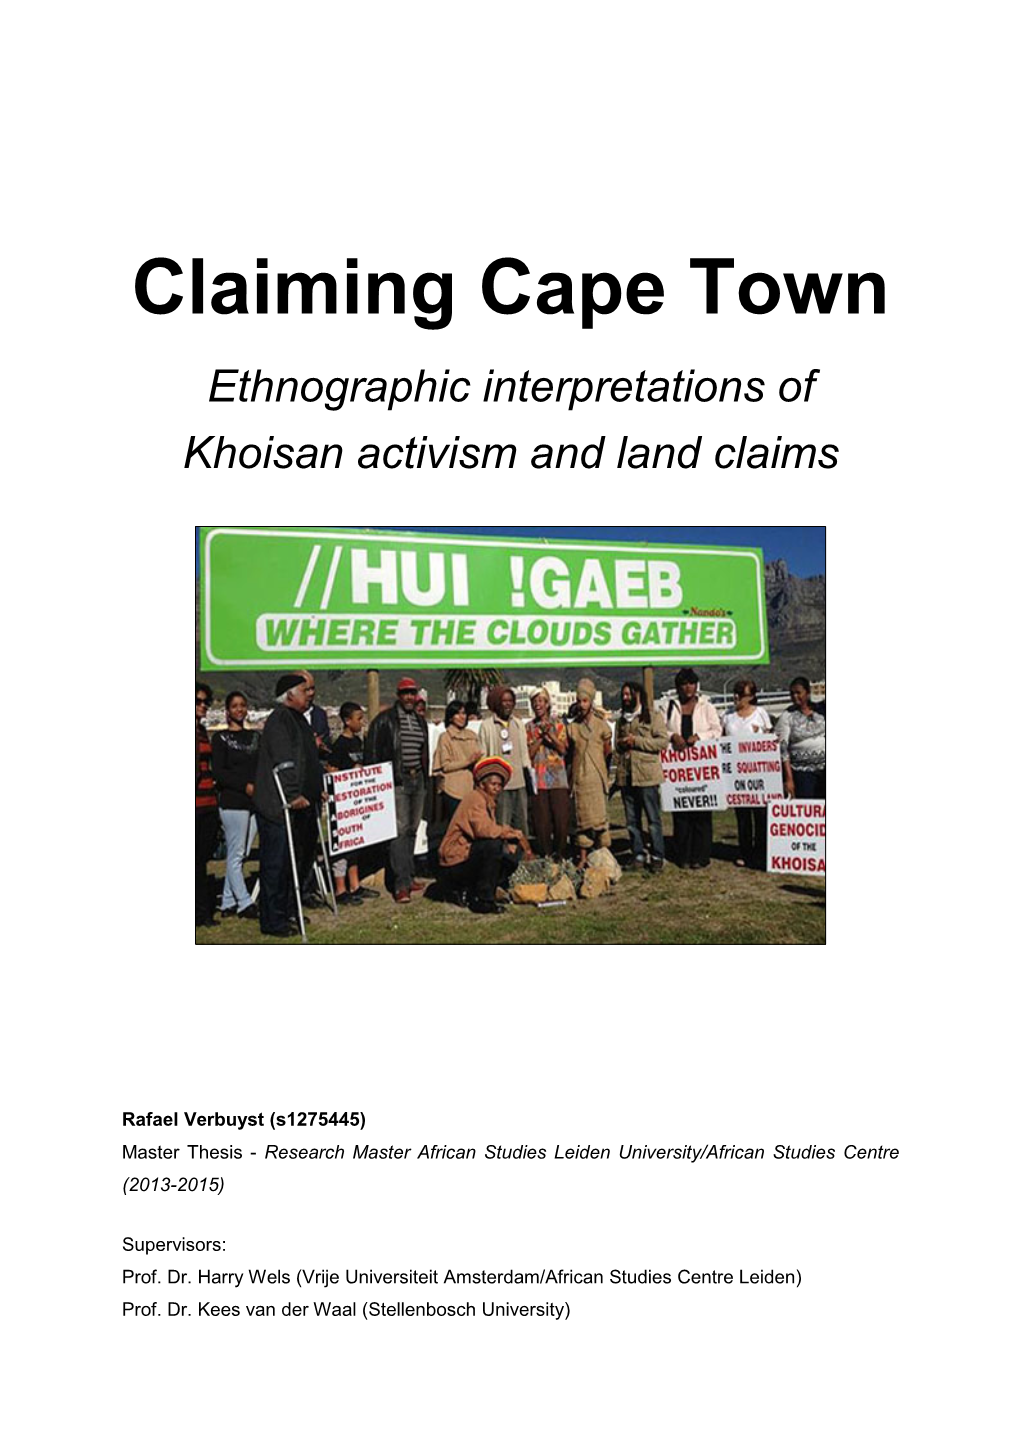 Claiming Cape Town Ethnographic Interpretations of Khoisan Activism and Land Claims